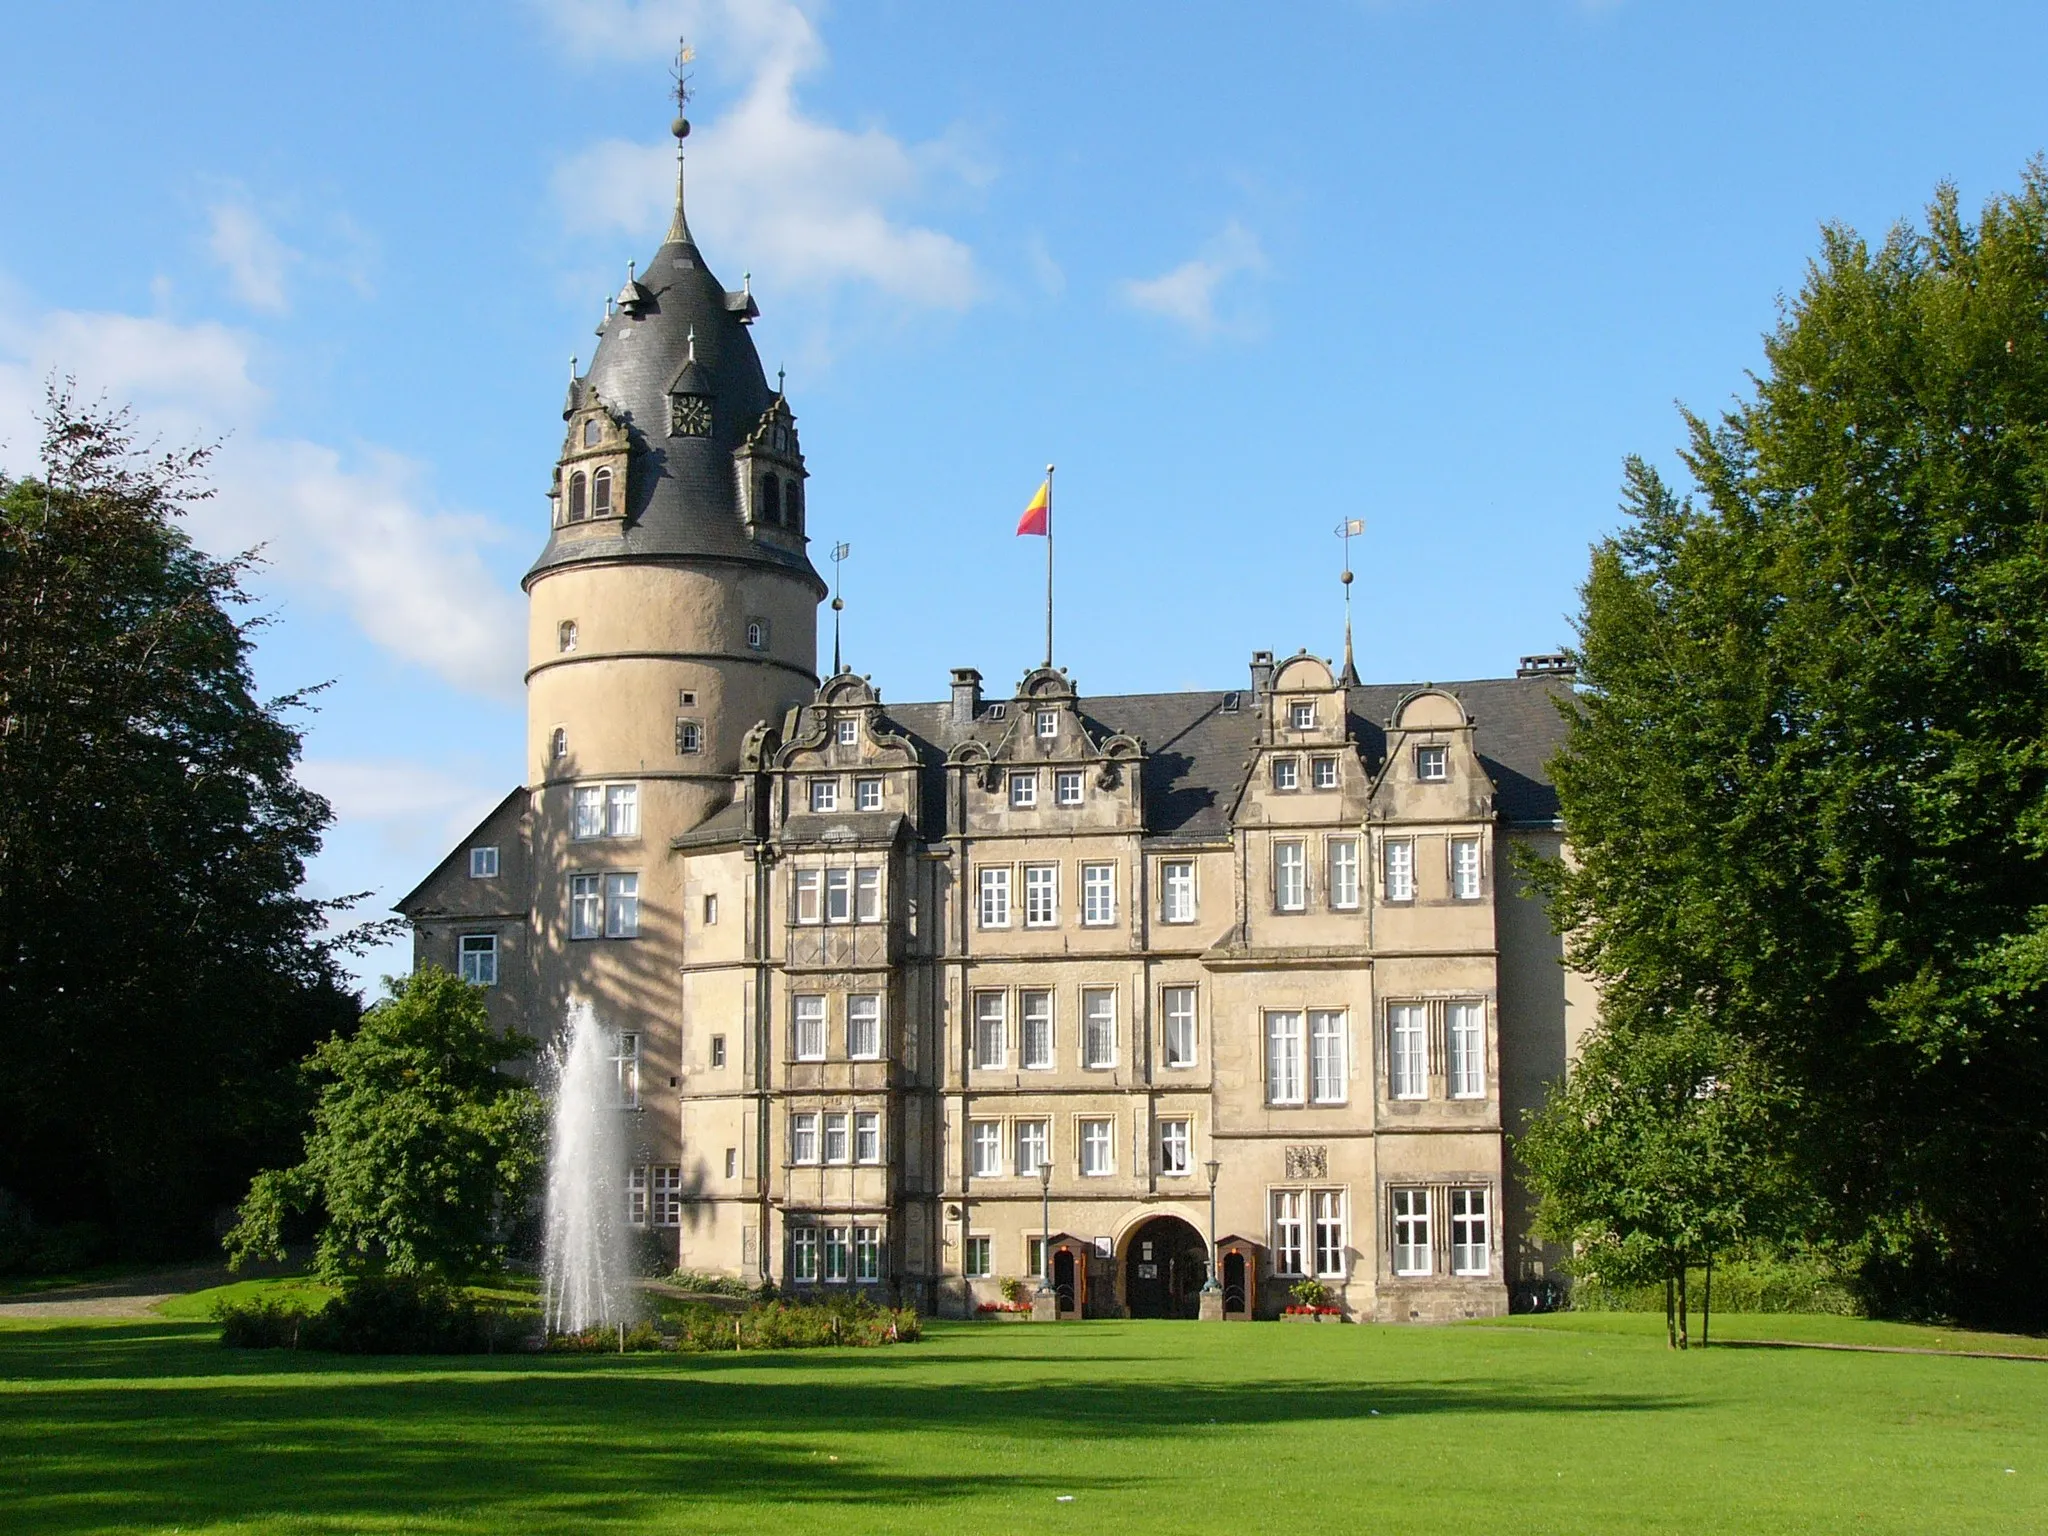 Photo showing: Detmold castle  in Detmold, district of Lippe, North Rhine-Westphalia, Germany.